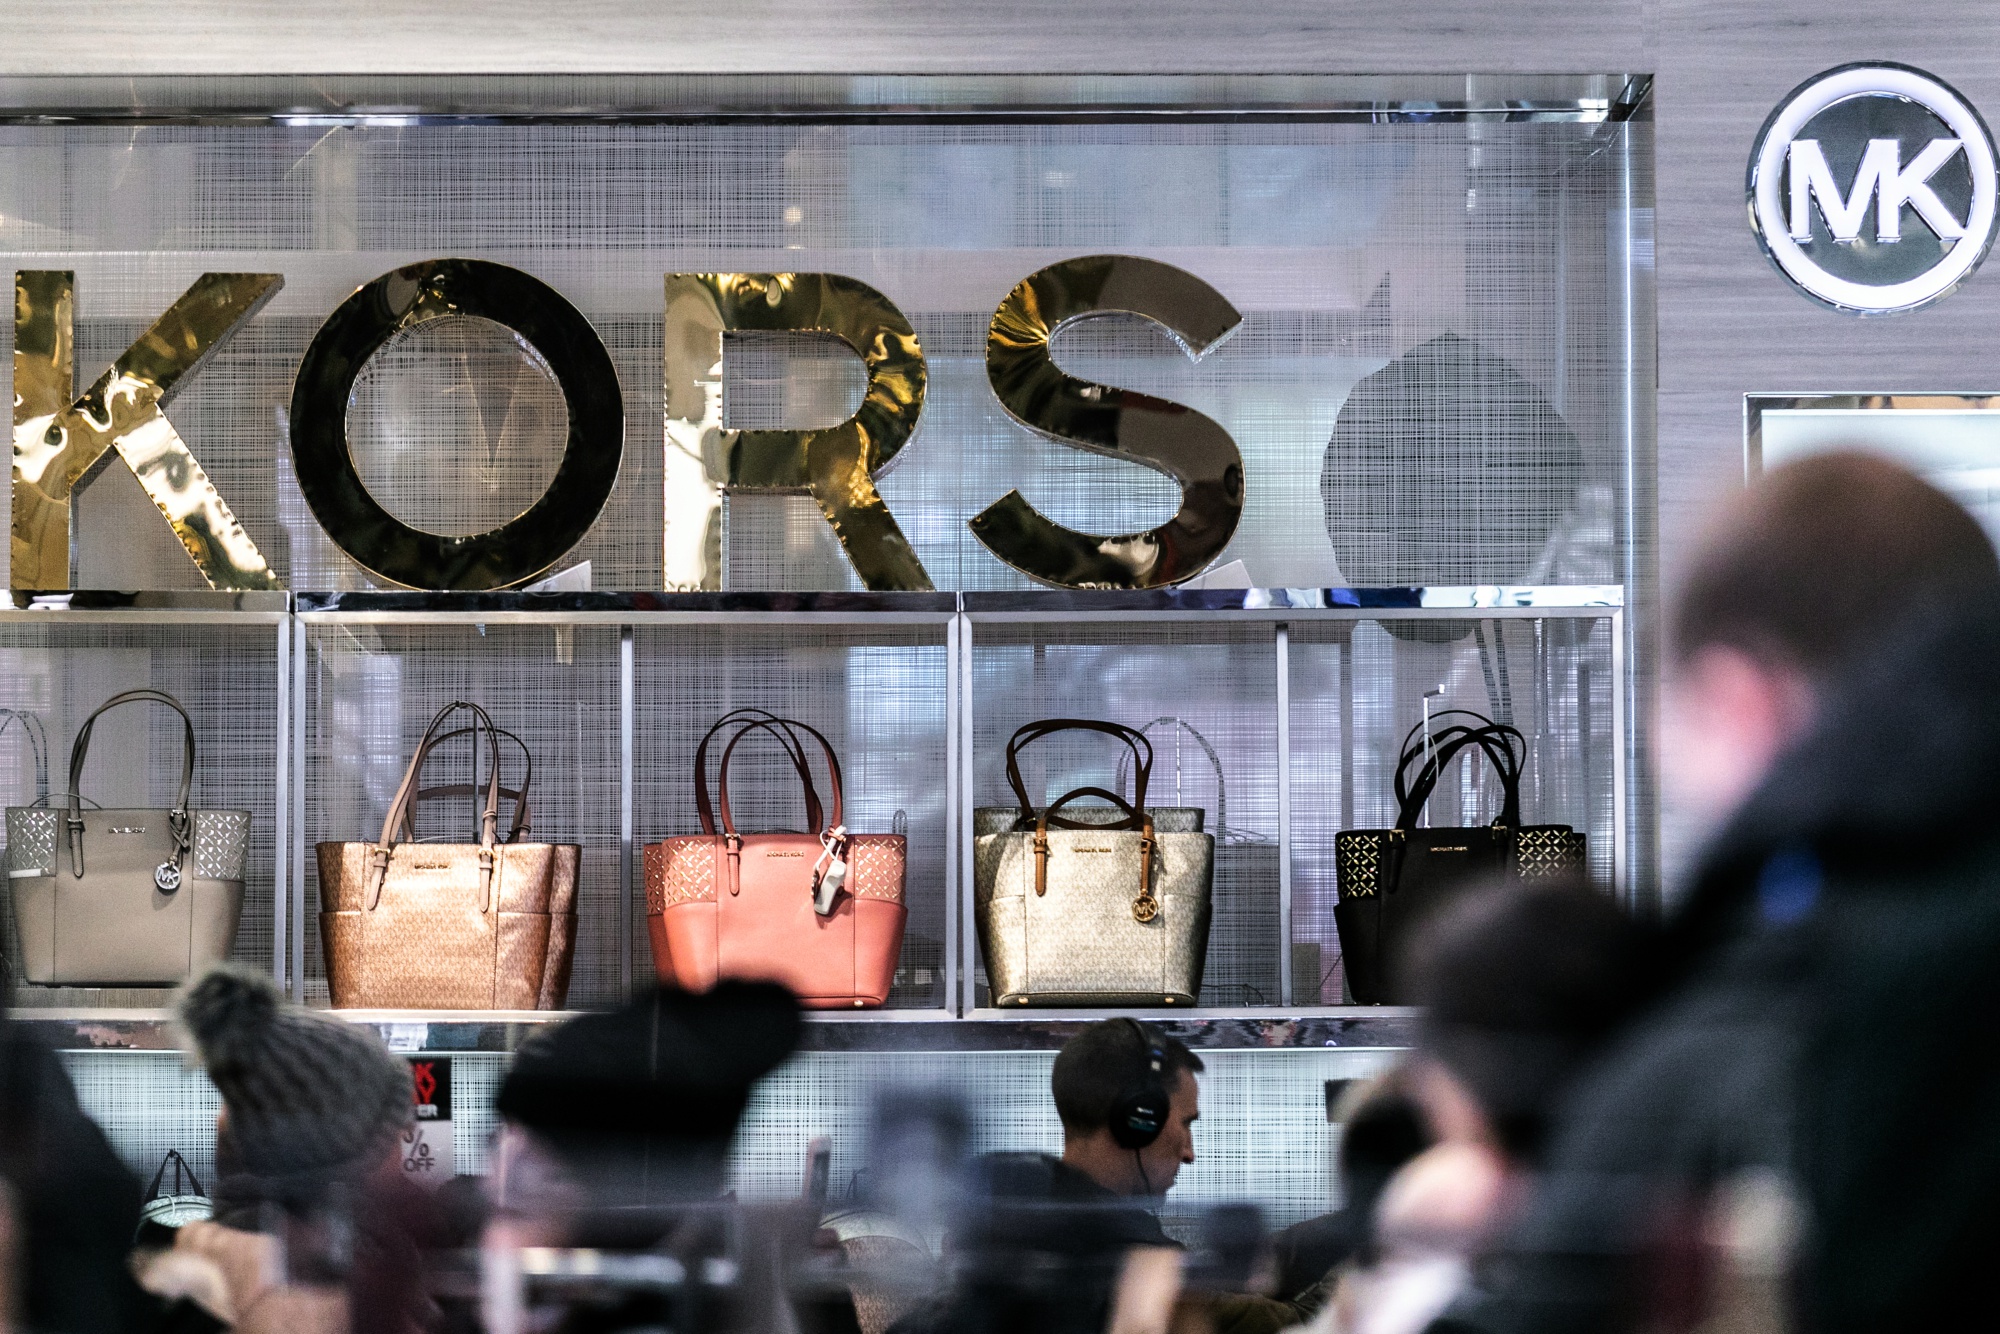 Coach And Michael Kors Owners Merge In $8.5 Billion Deal To Create